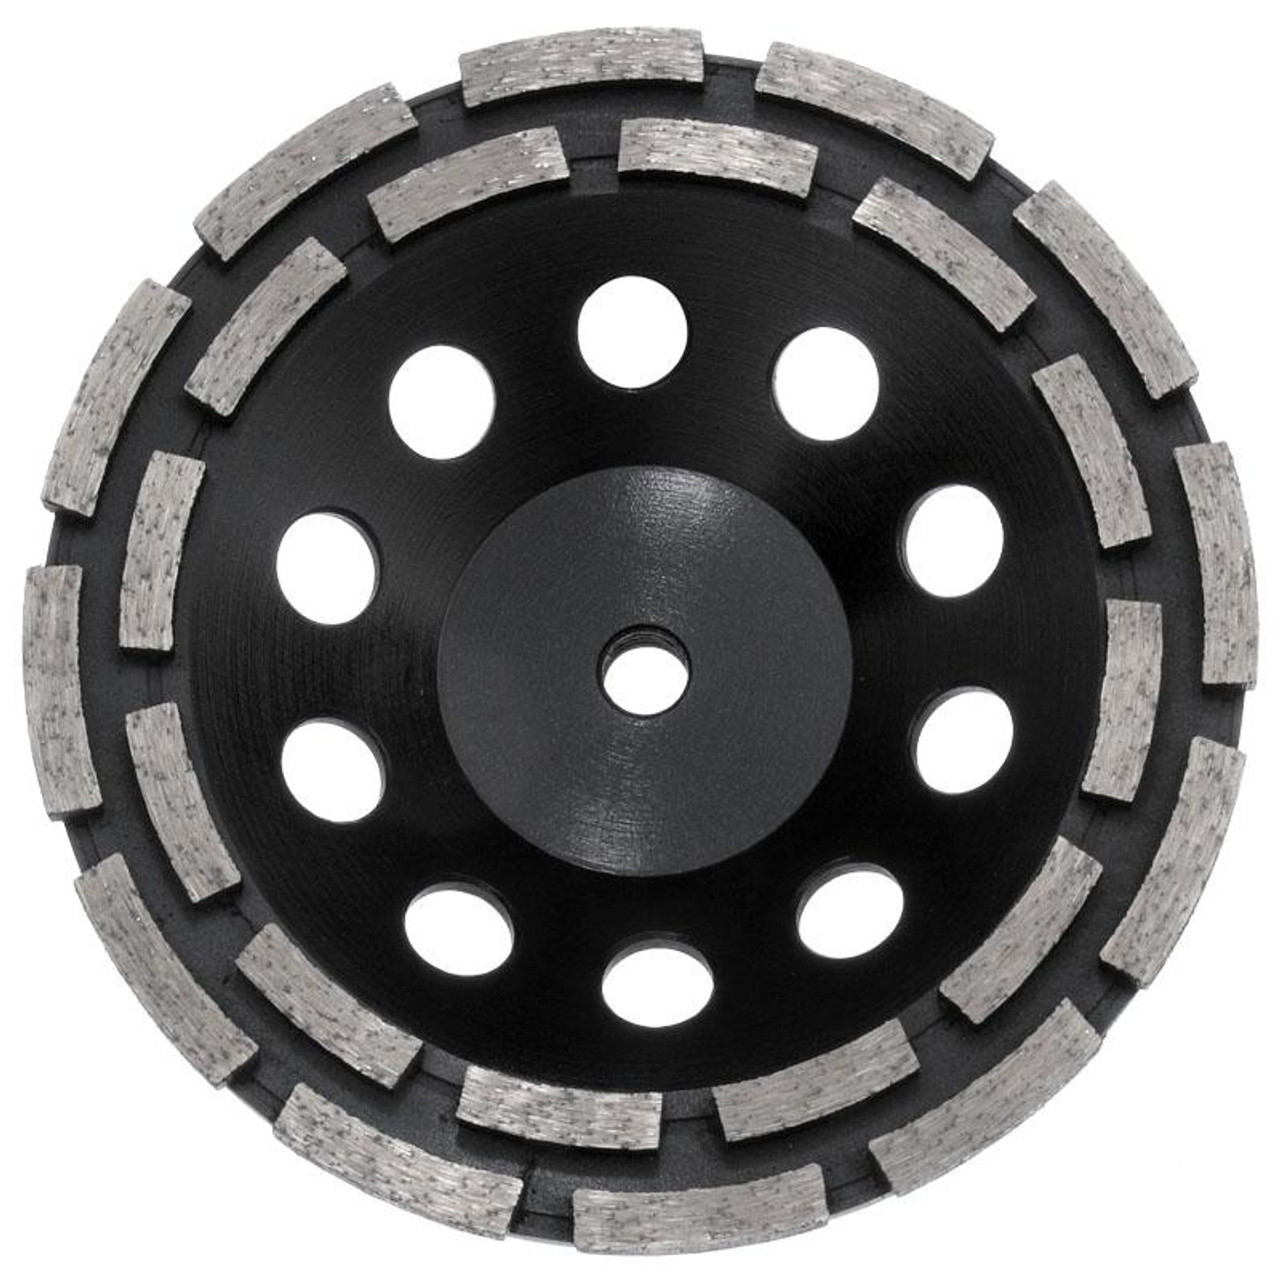 Austsaw - 185Mm (7In)   Diamond Cup Wheel Double Row - M14 Thread Bore - Double Row